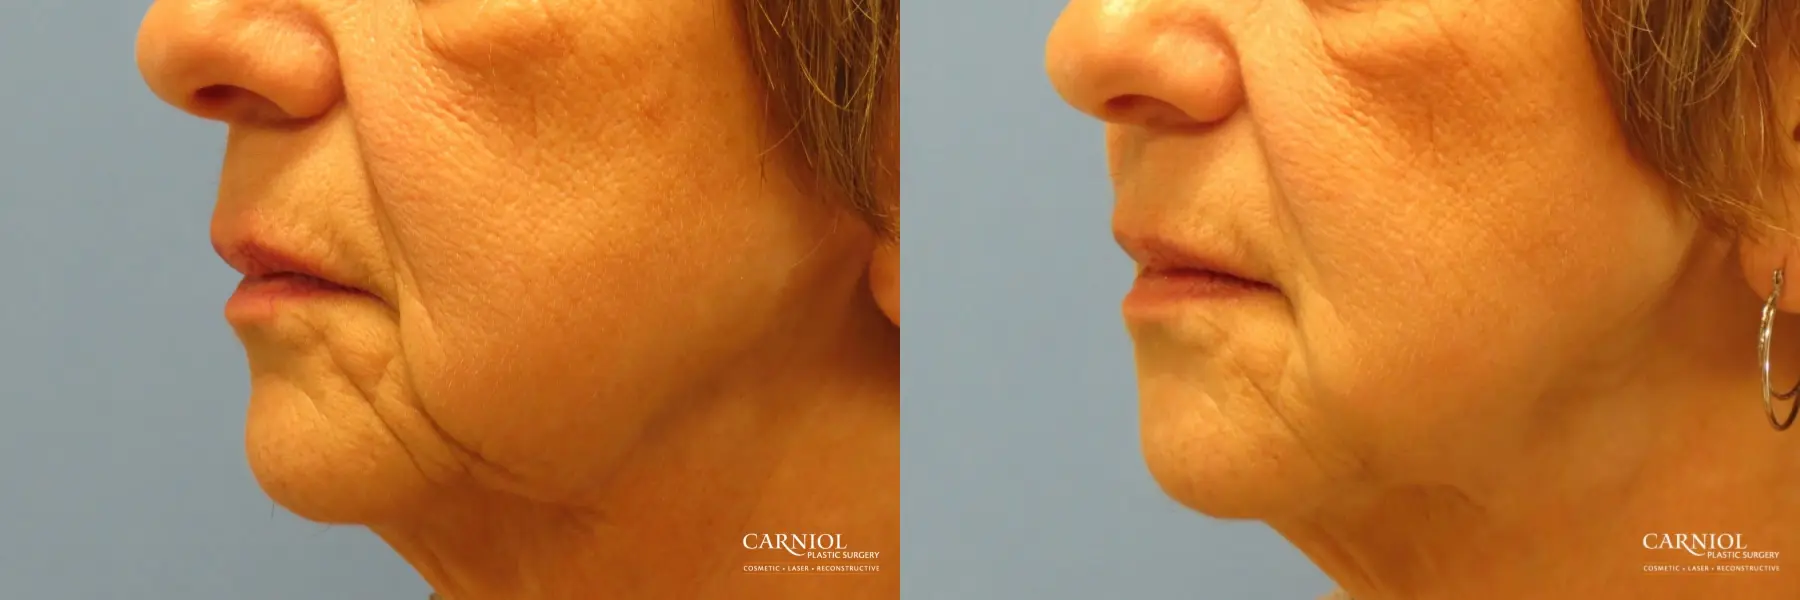 Non-Surgical Facelift: Patient 1 - Before and After 3